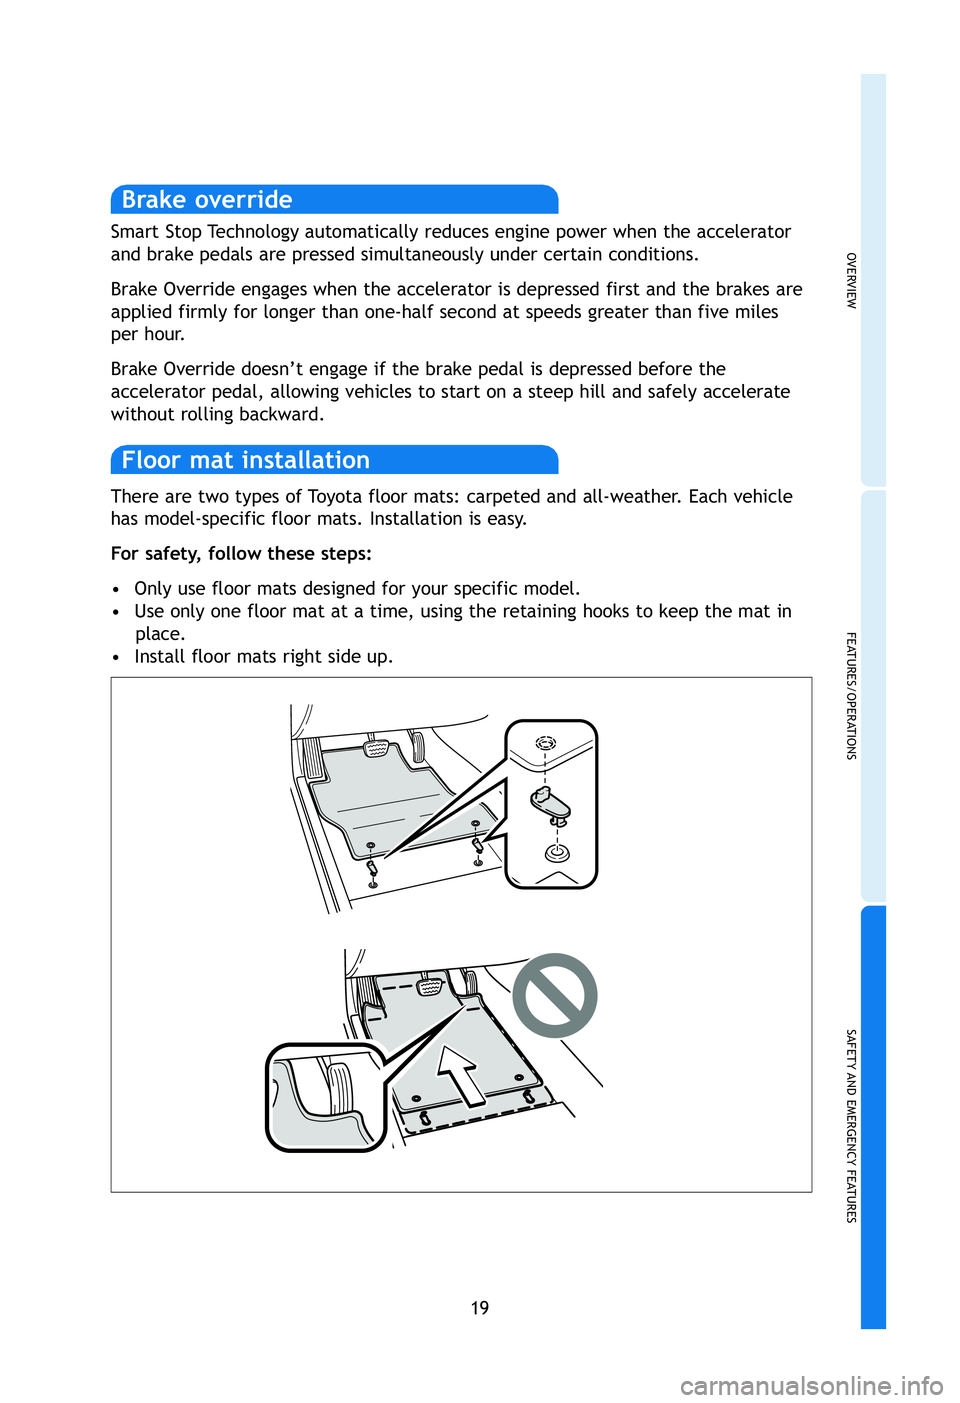 TOYOTA tC 2012  Owners Manual (in English) OVERVIEW
FEATURES/OPERATIONS
SAFETY AND EMERGENCY FEATURES
19
nd
.s
on
for
p by
. 
king
han
and
n
.
tilt
en There are two types of Toyota floor mats: carpeted and all-weather. Each vehicle
has model-s